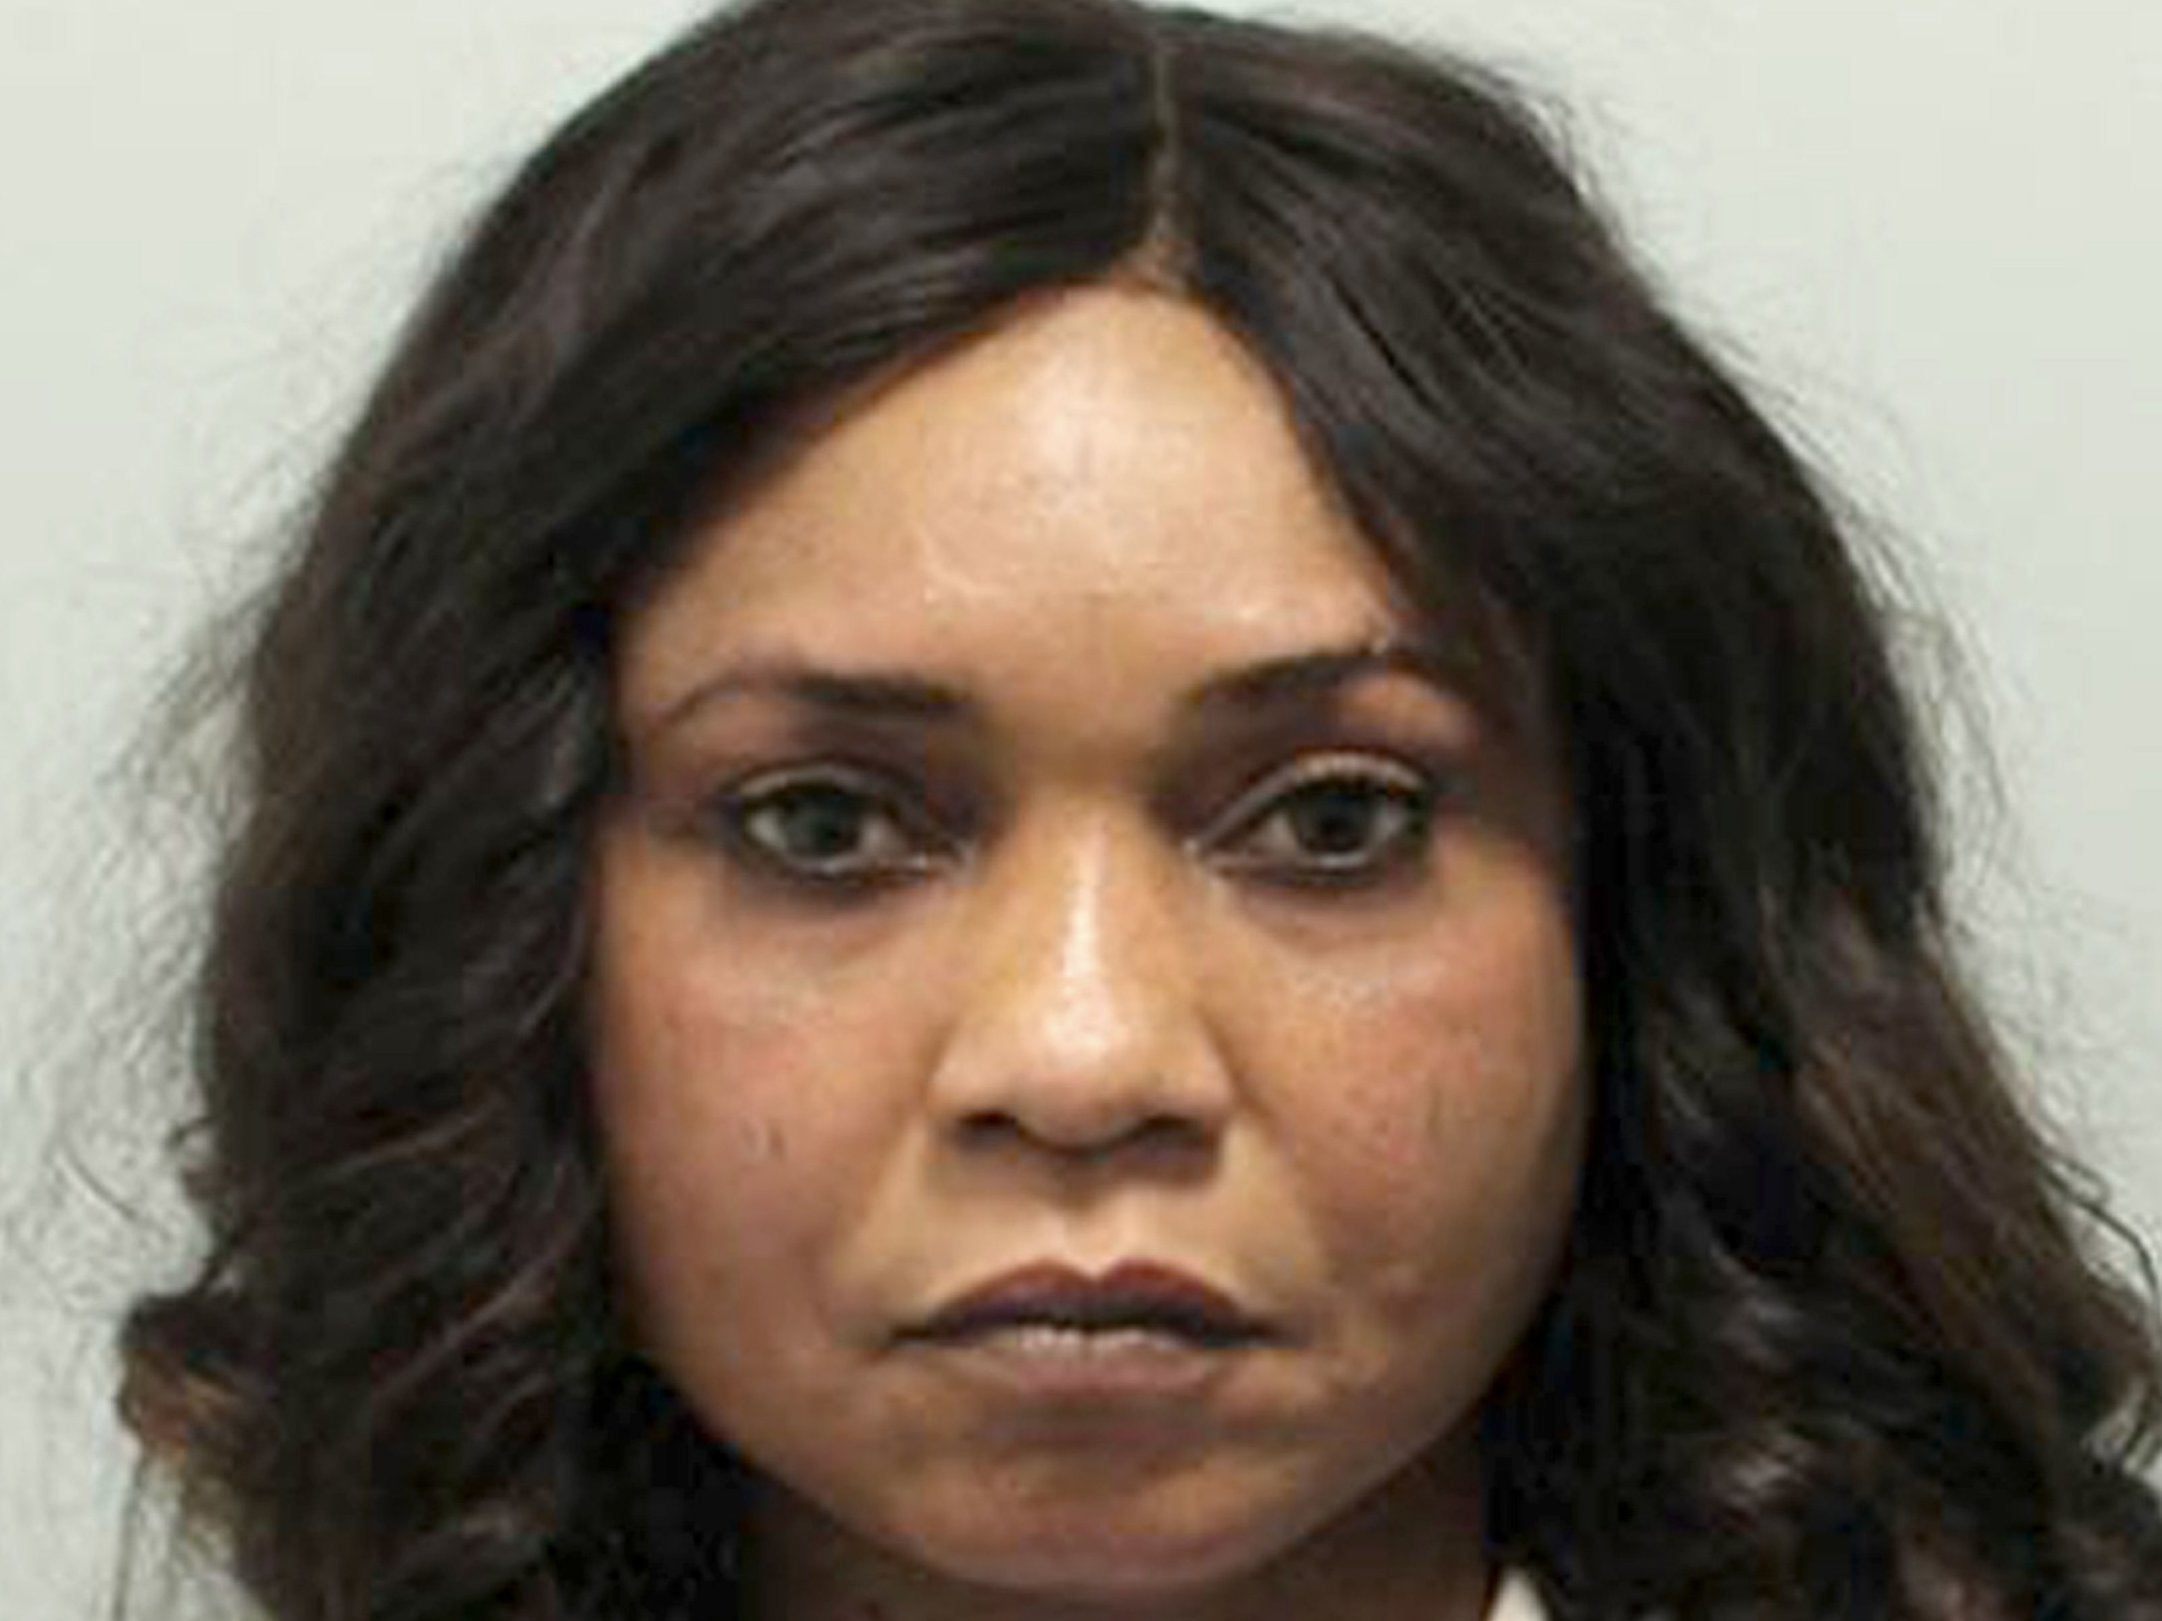 Josephine Iyamu, a London-based nurse who has been found guilty of trafficking five Nigerian women to Germany to work as prostitutes